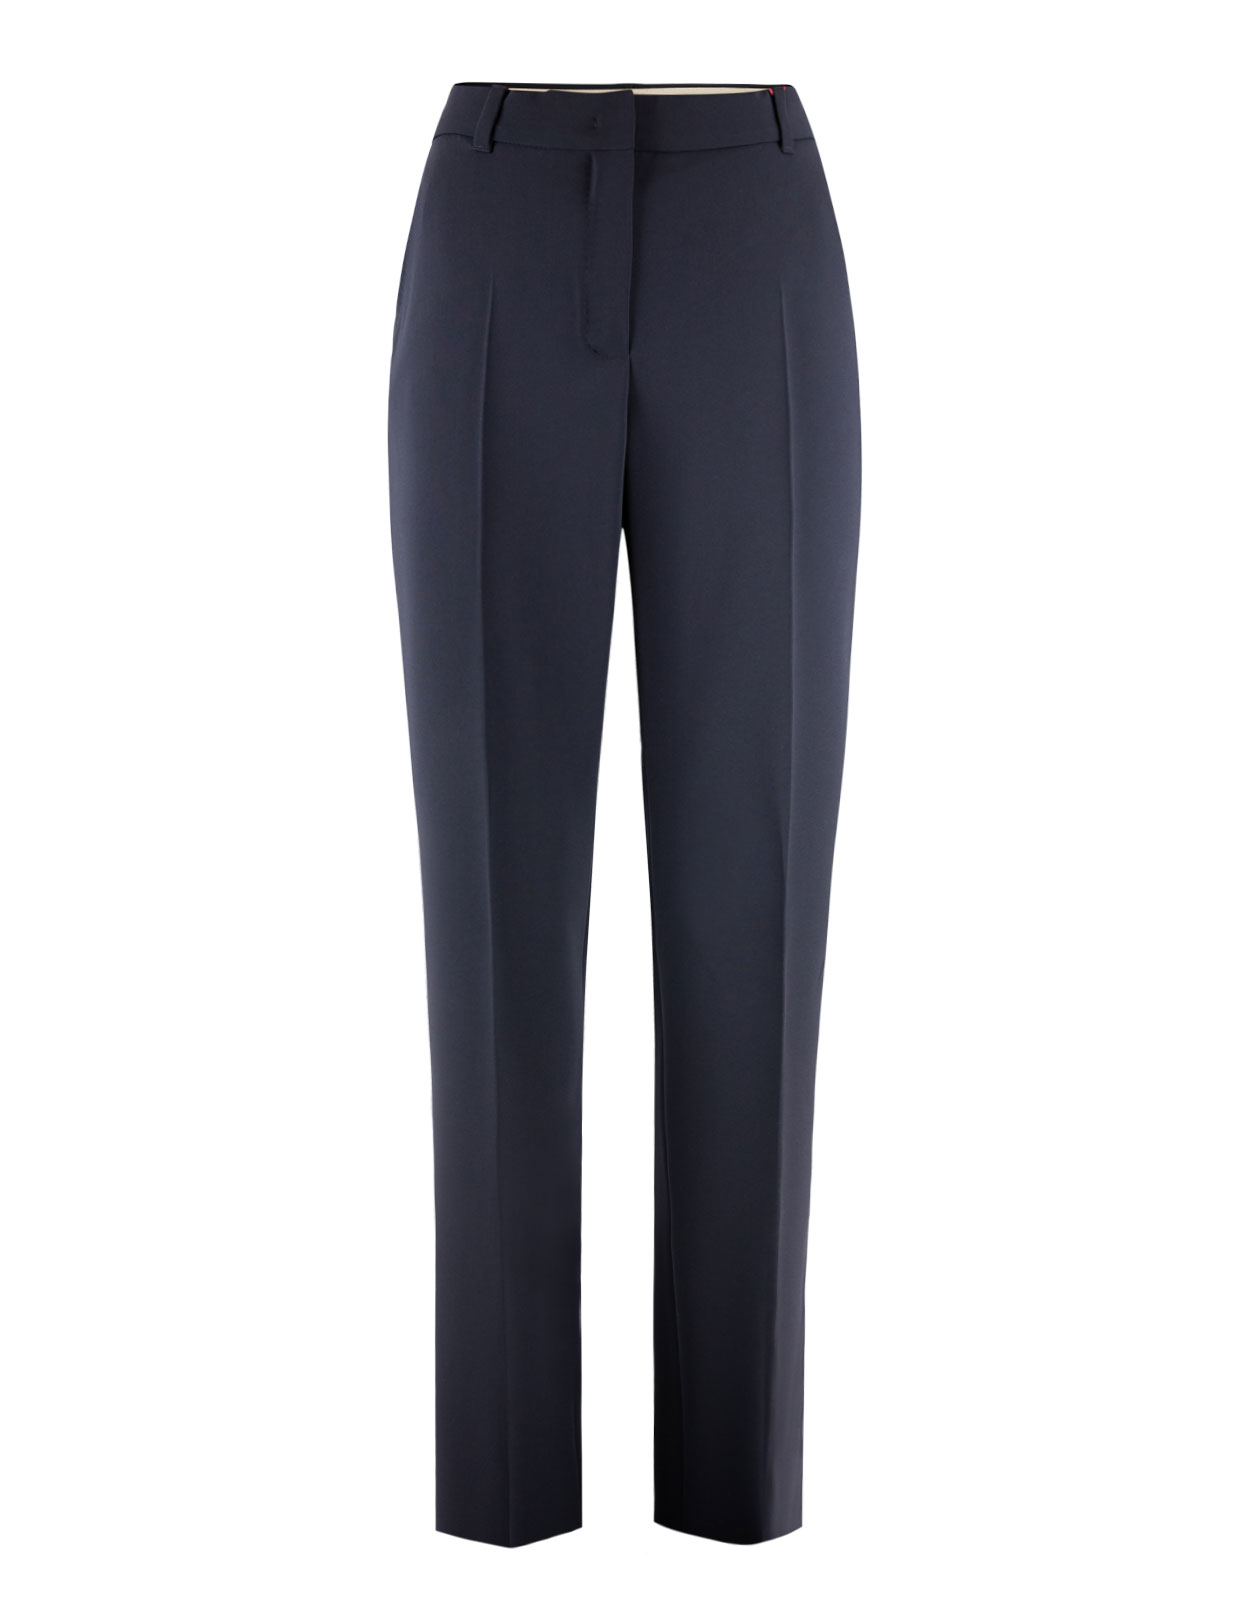 Manager Trousers Navy